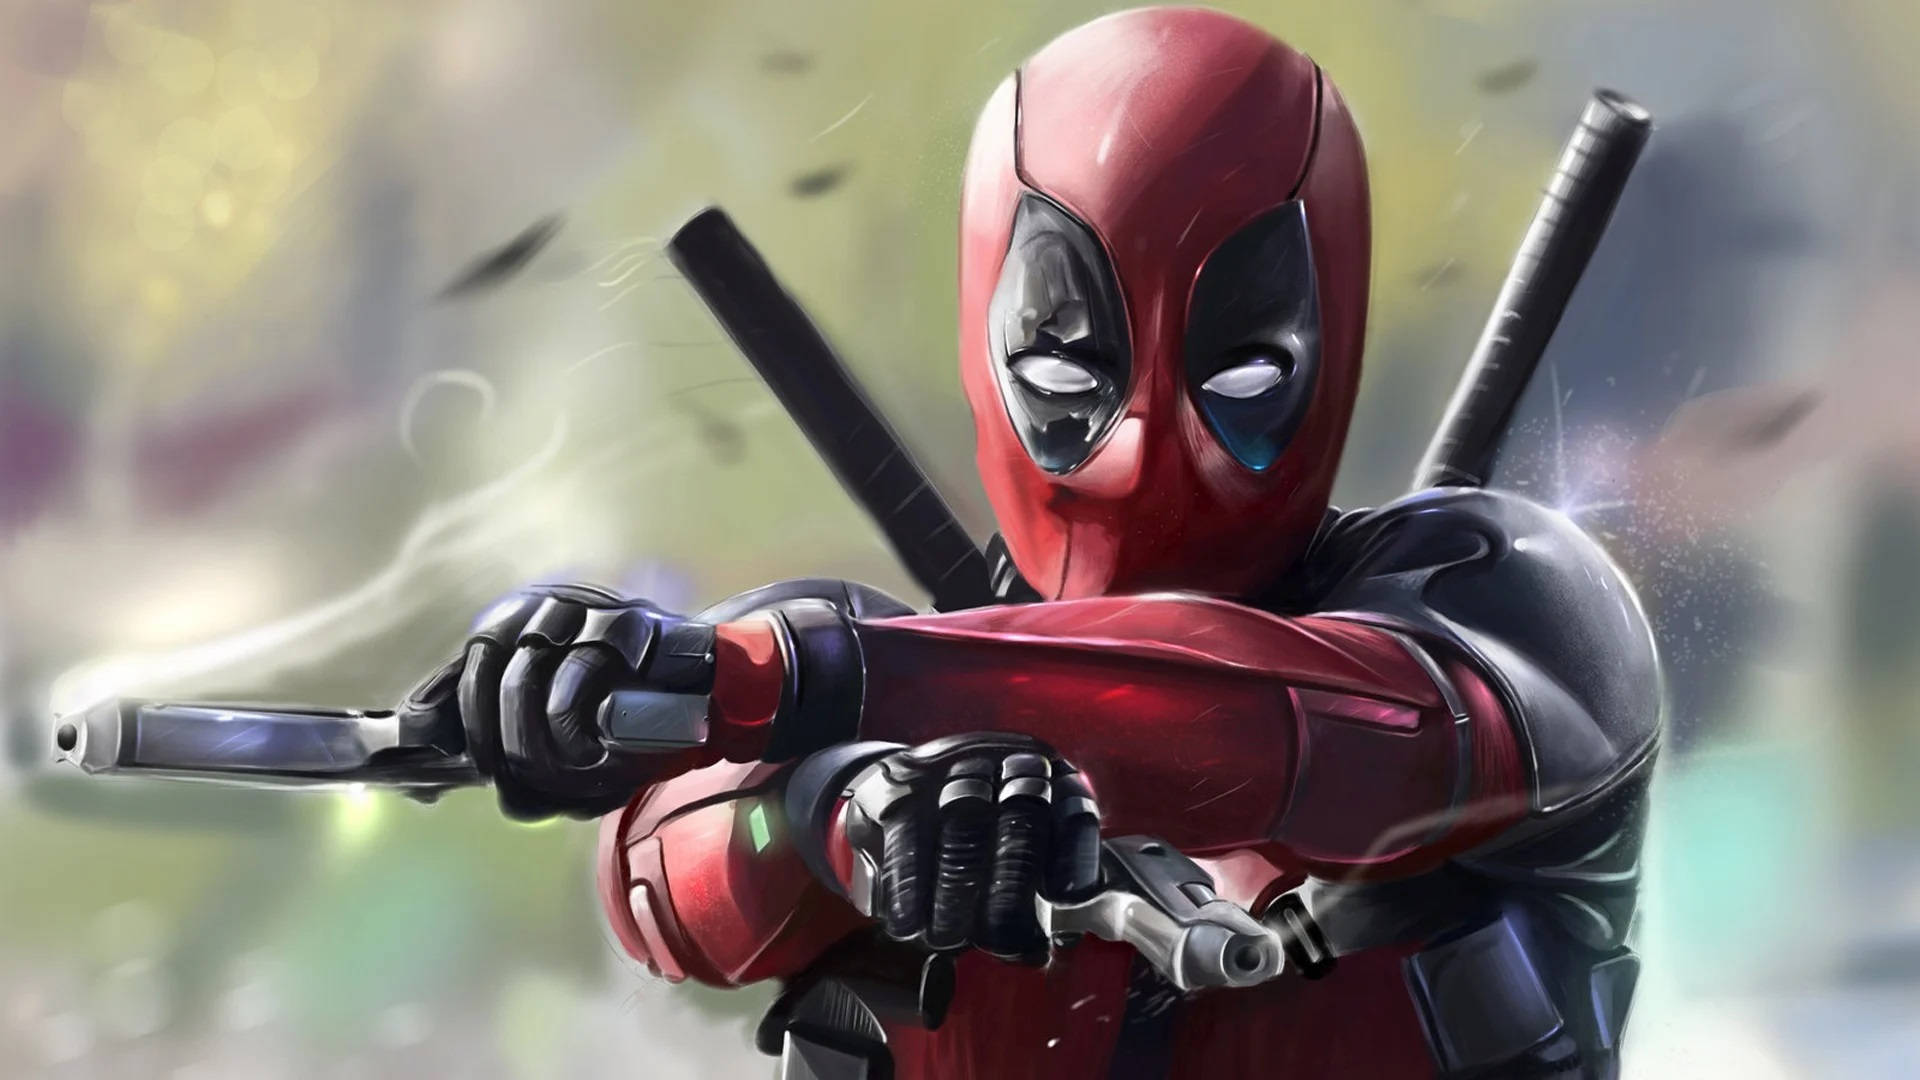 Deadpool - The Merc With A Mouth In Action Wallpaper